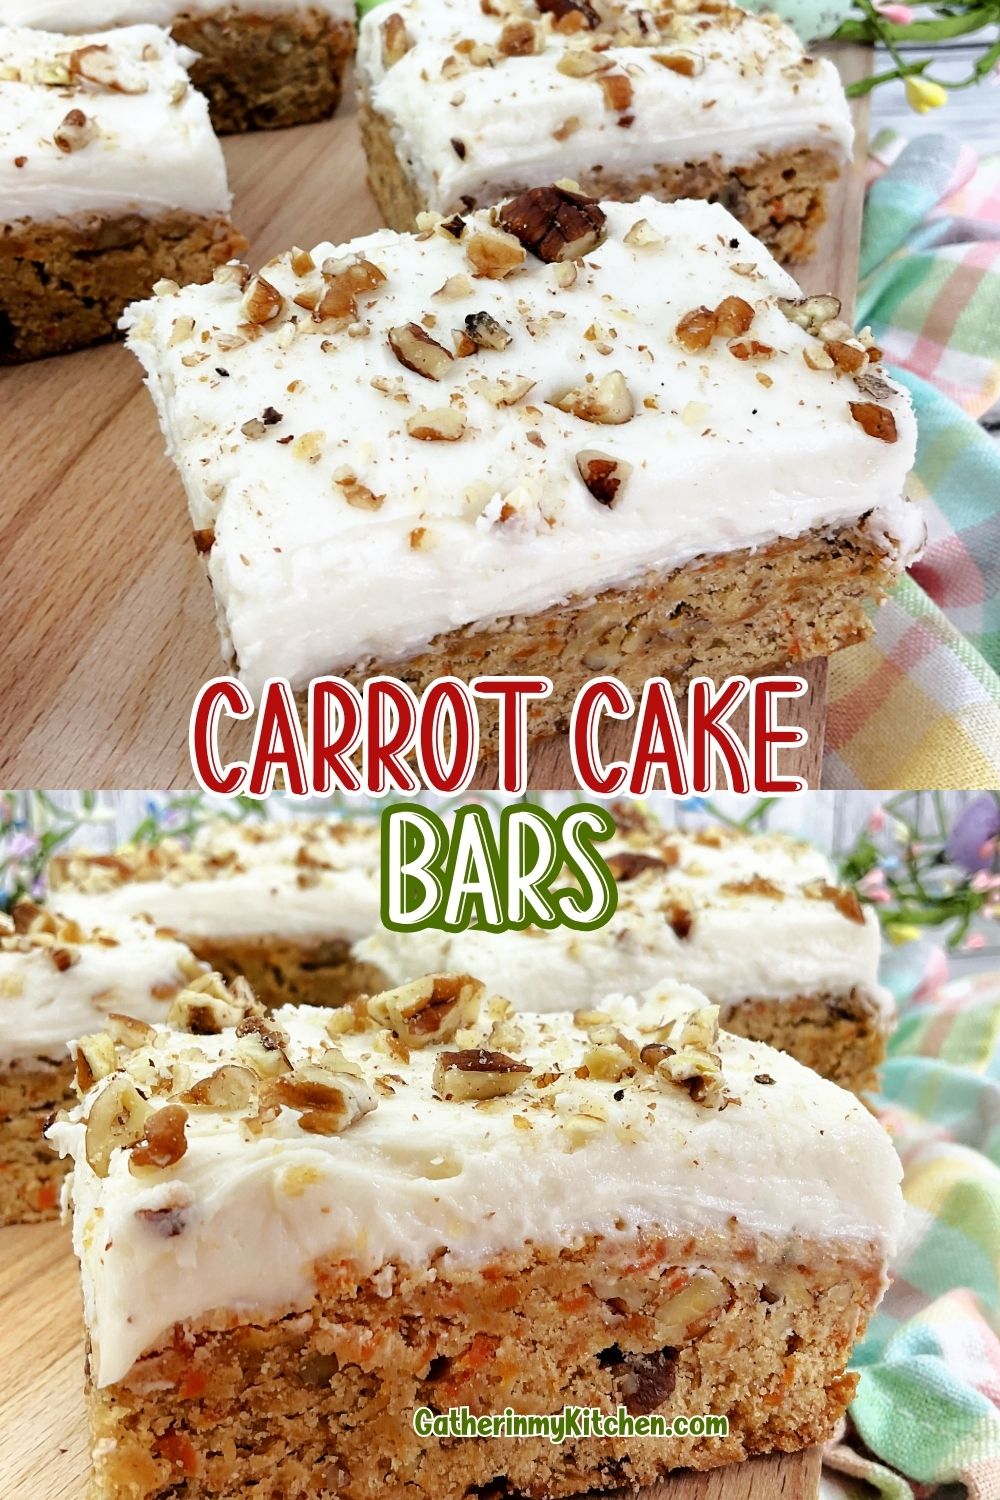 Pin image: top and bottom have images of carrot cake bars, middle says "Carrot Cake Bars".